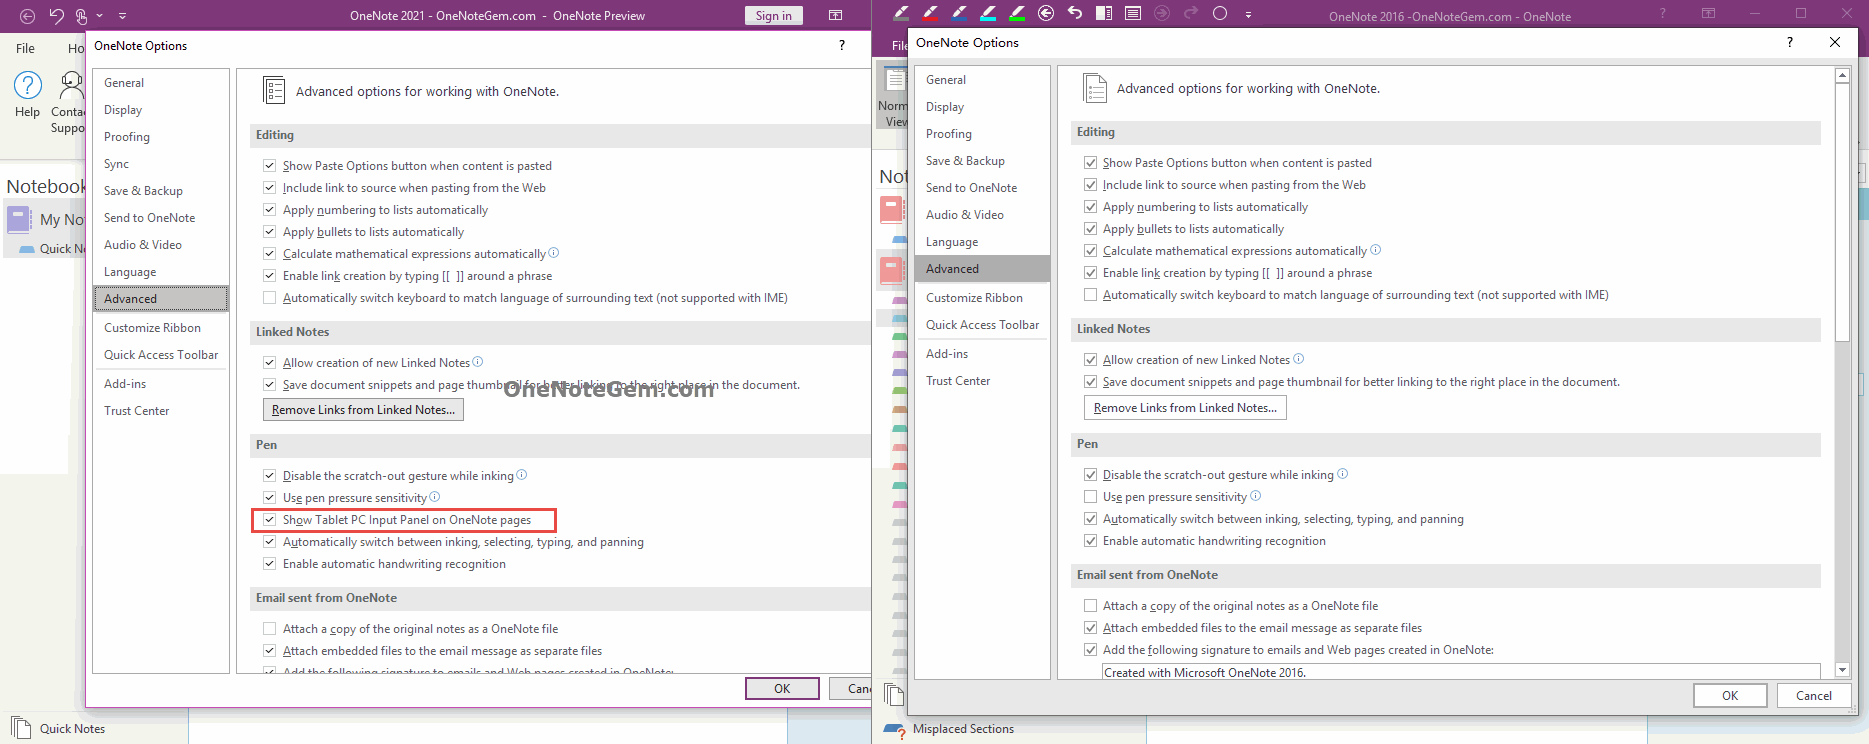 Show Tablet PC Input Panel on OneNote pages.